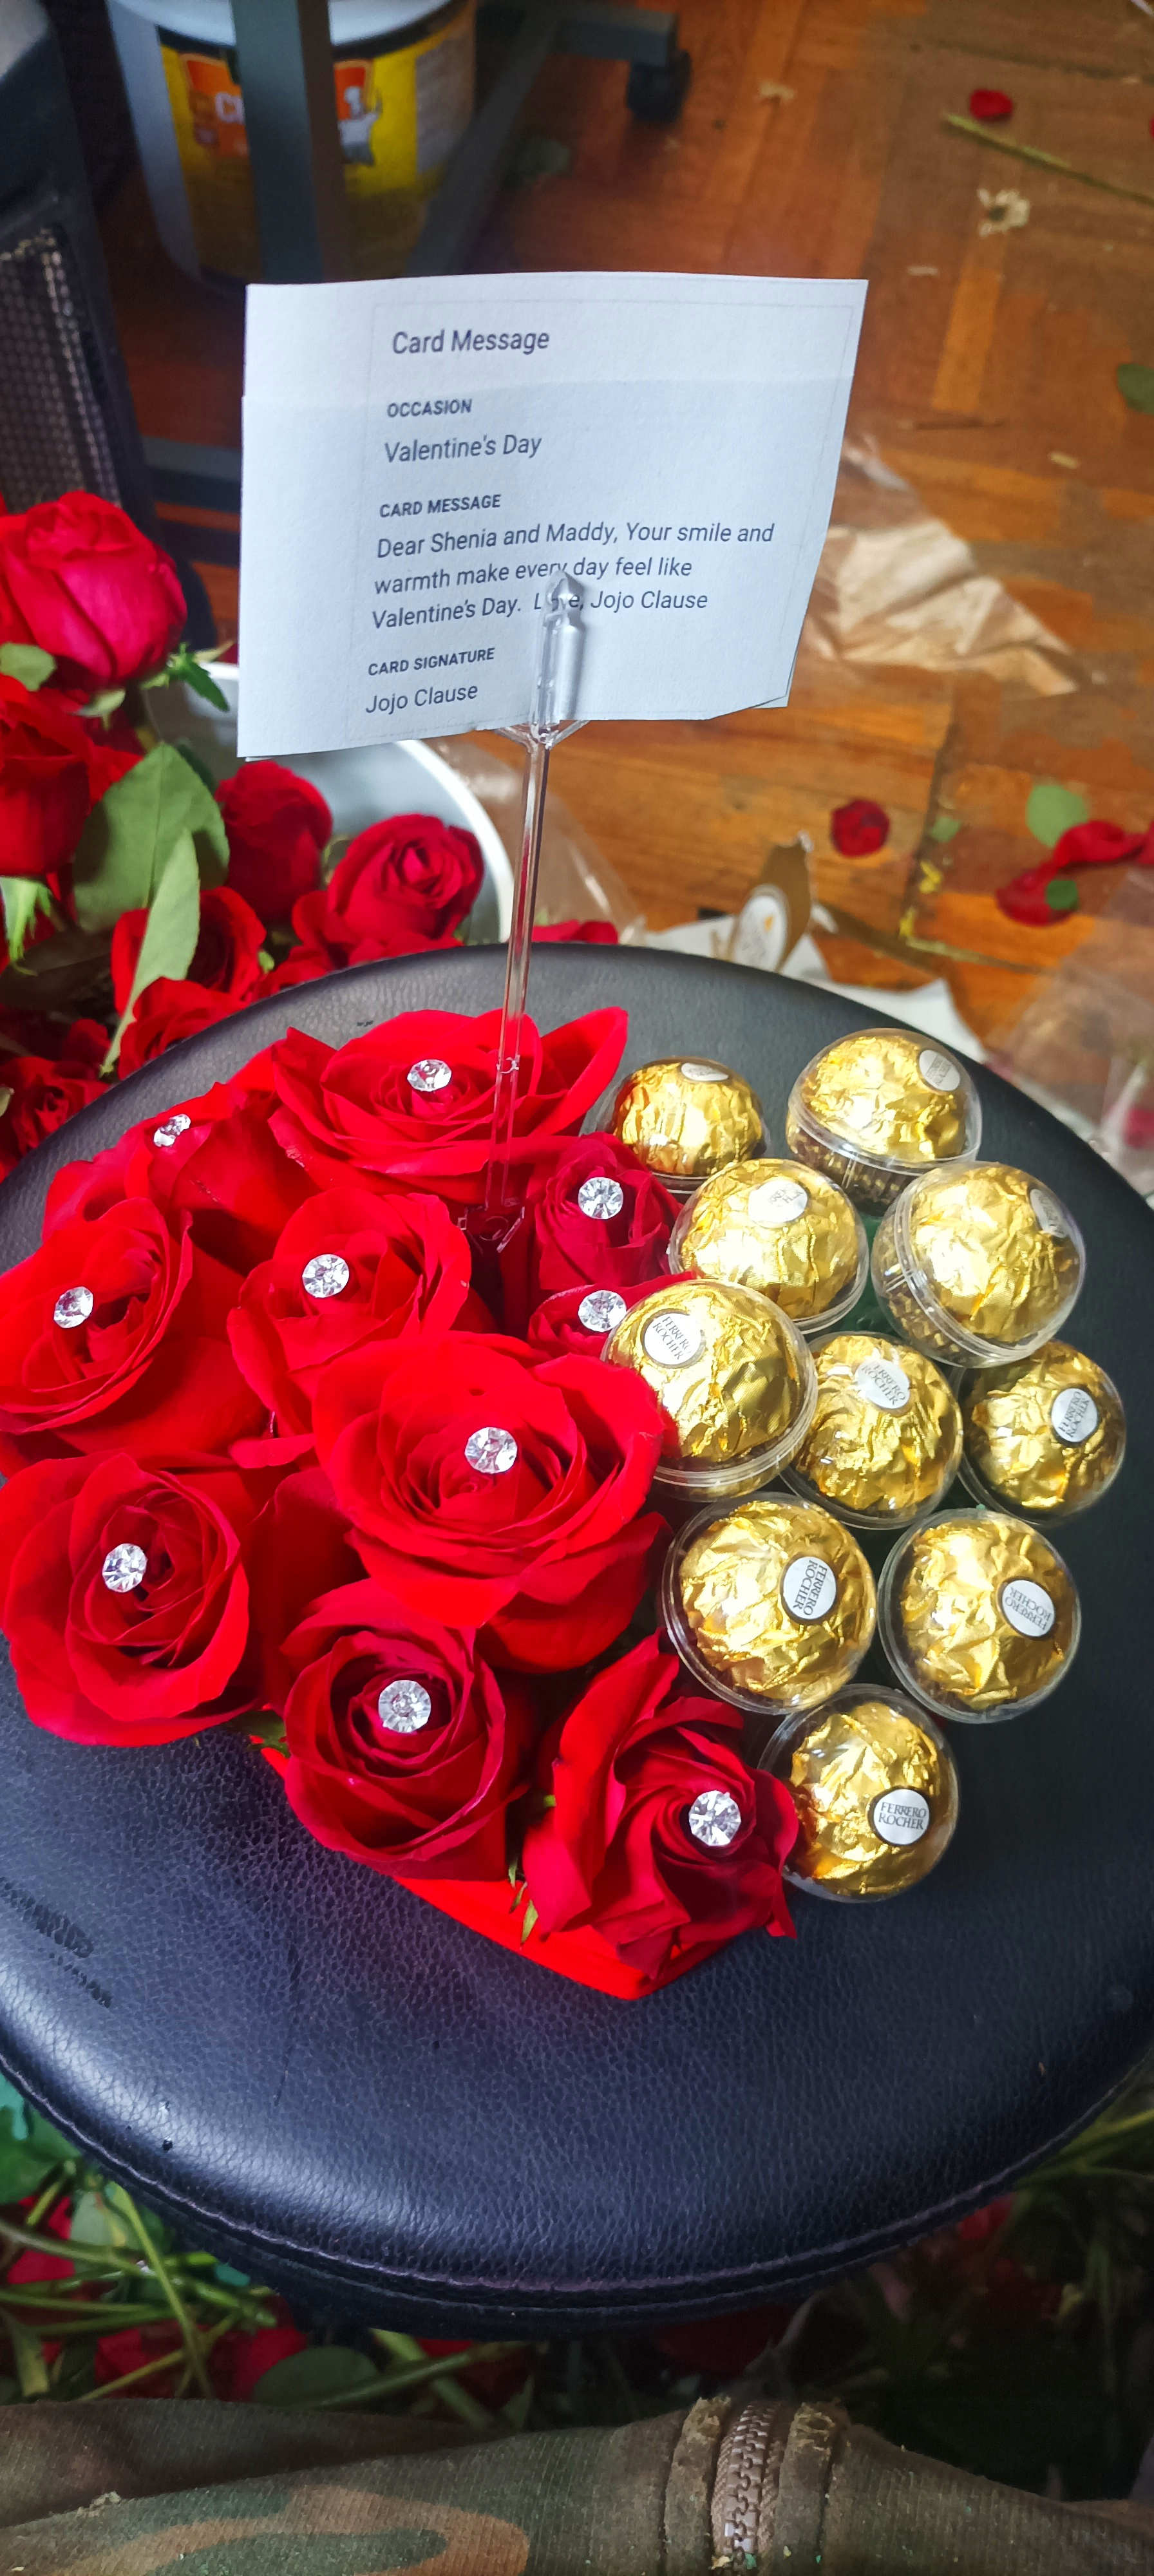 RED HEART WITH ROSES AND CHOCOLATES - Expertly designed red heart box with red roses, diamond pins, gold butterflies and ferrero rocher chocolates.